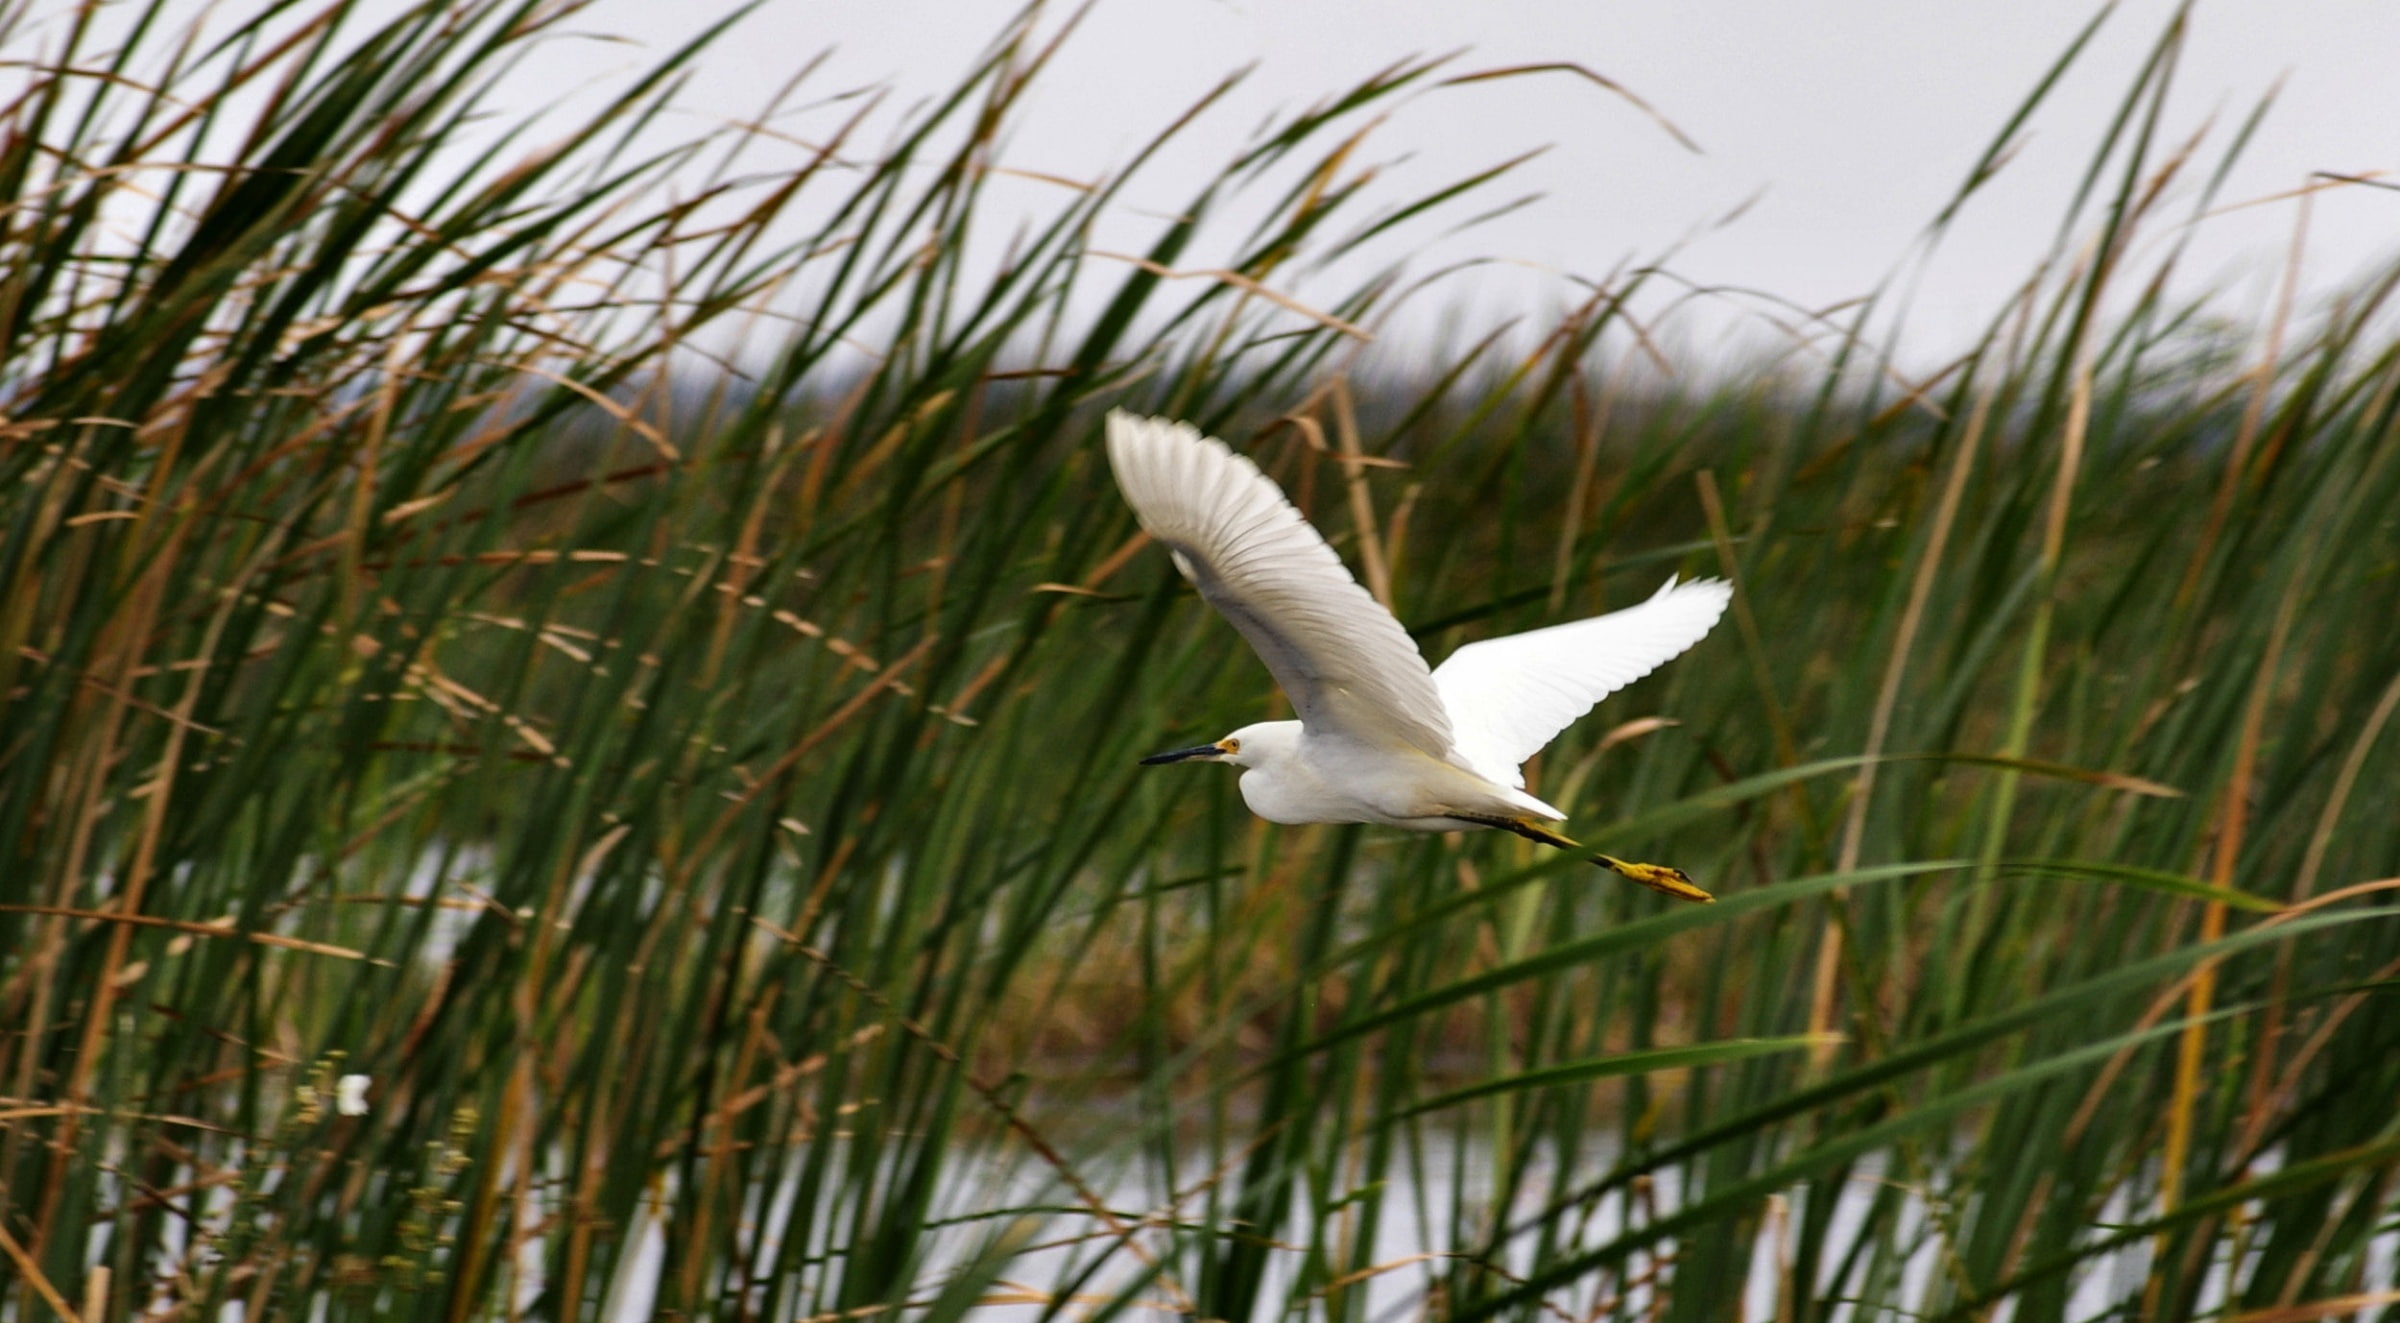 Snowy Egret in the Tullies, Animals, Birds, animal themes, flying